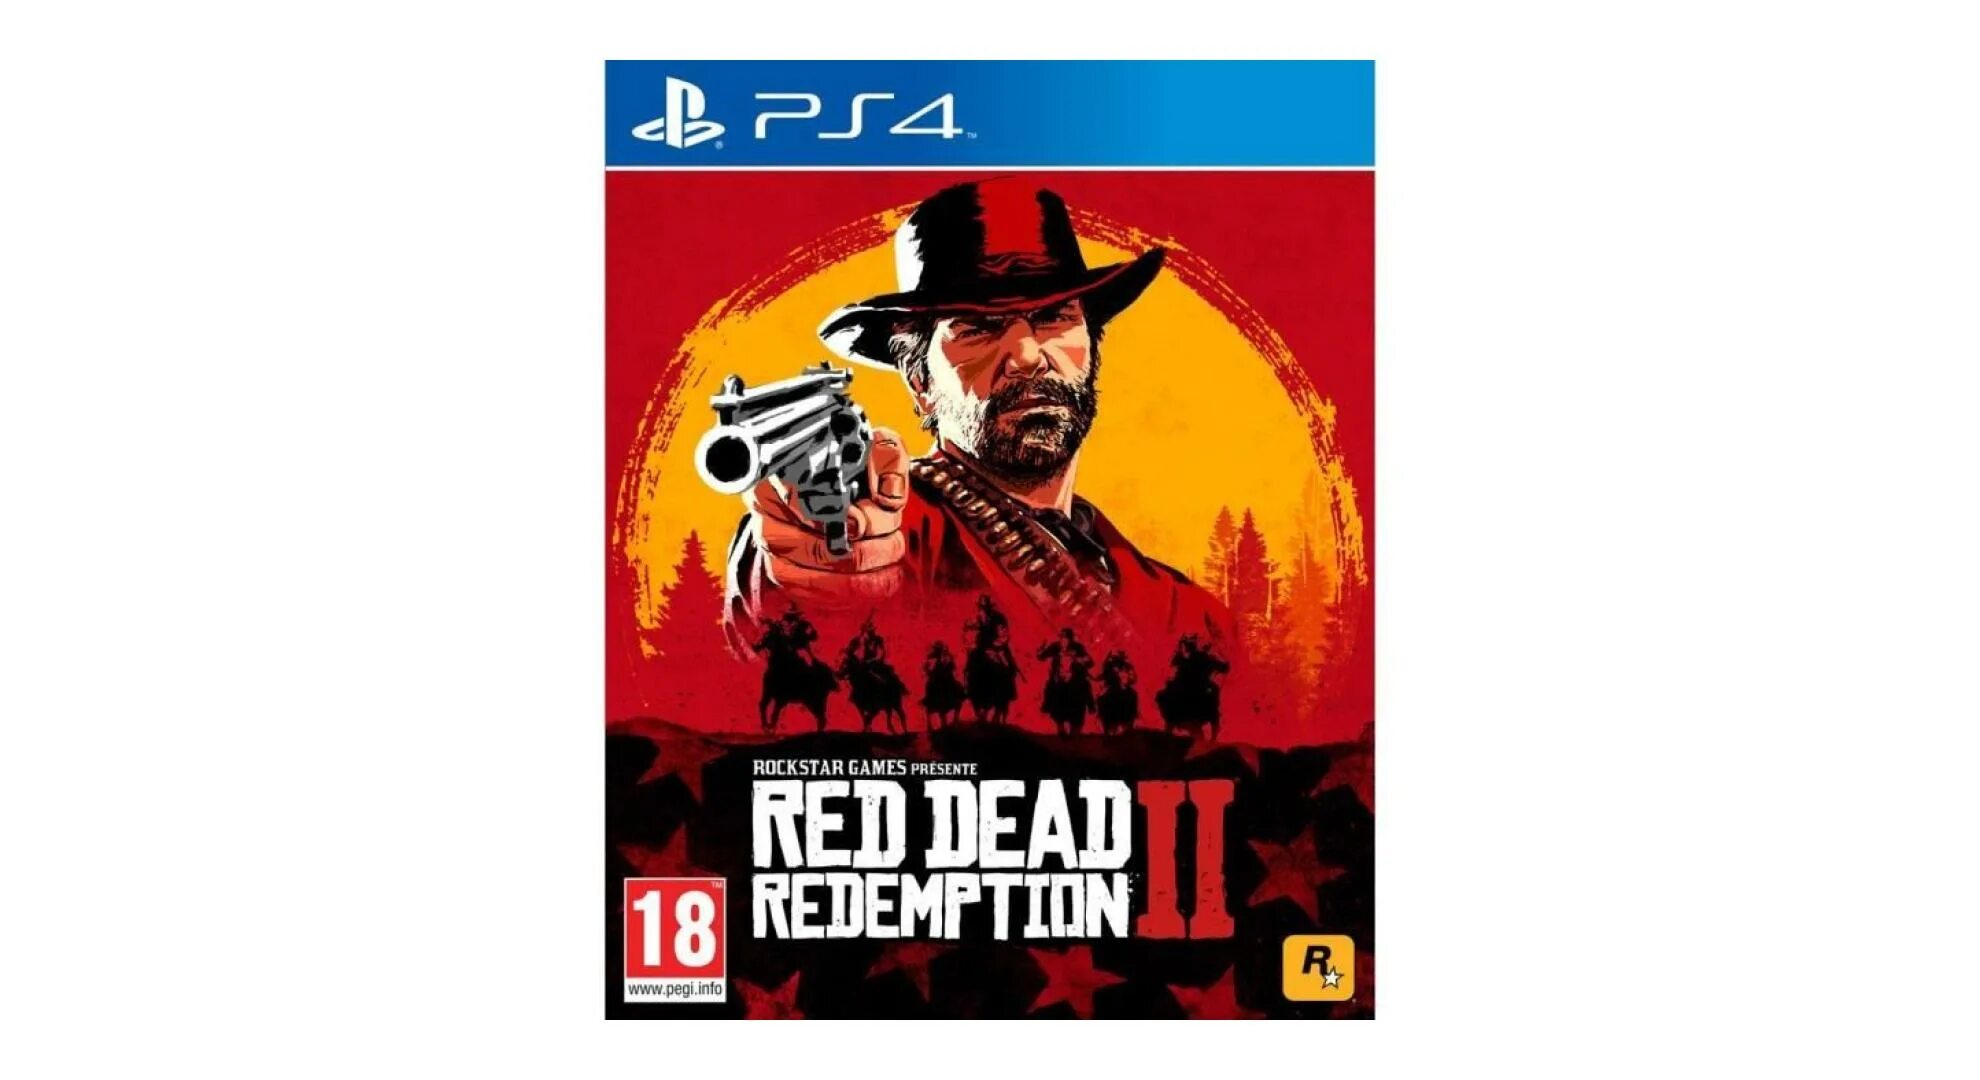 Red dead ps4 купить. Red Dead Redemption 2 ps4. Rdr 2 ps4 диск. Red Dead Redemption 1 ps4 диск. Ред дед редемпшен 2 ps4.